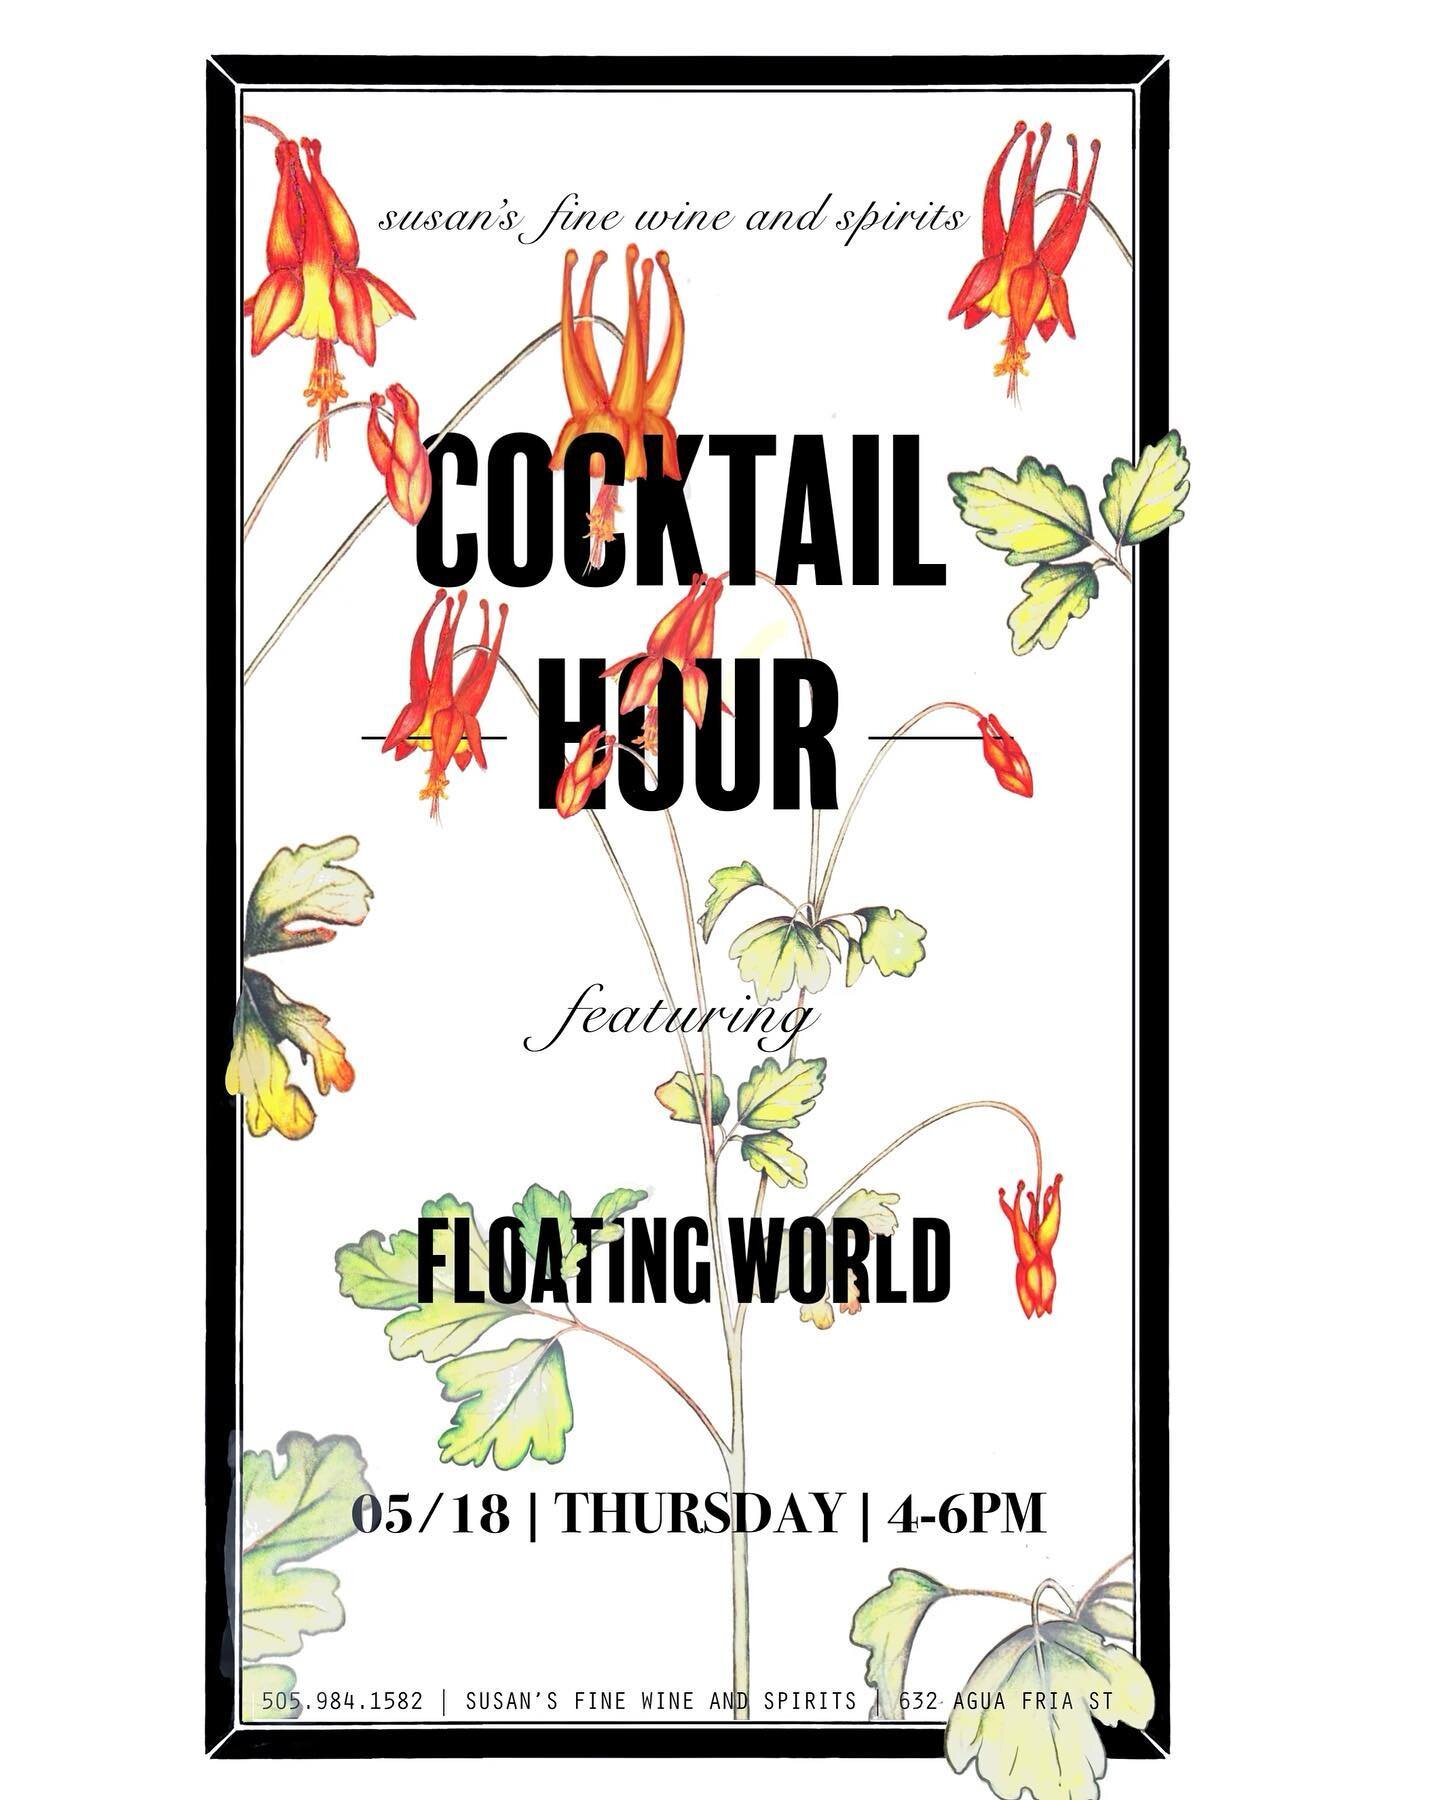 cocktail hour this thursday @susansfinewineandspirits 4-6pm🍹 5 cocktail samples for $10, plus free tasting of the ingredients 🥳 

#cocktailtime #mixology #mixeddrinks #cocktailtasting